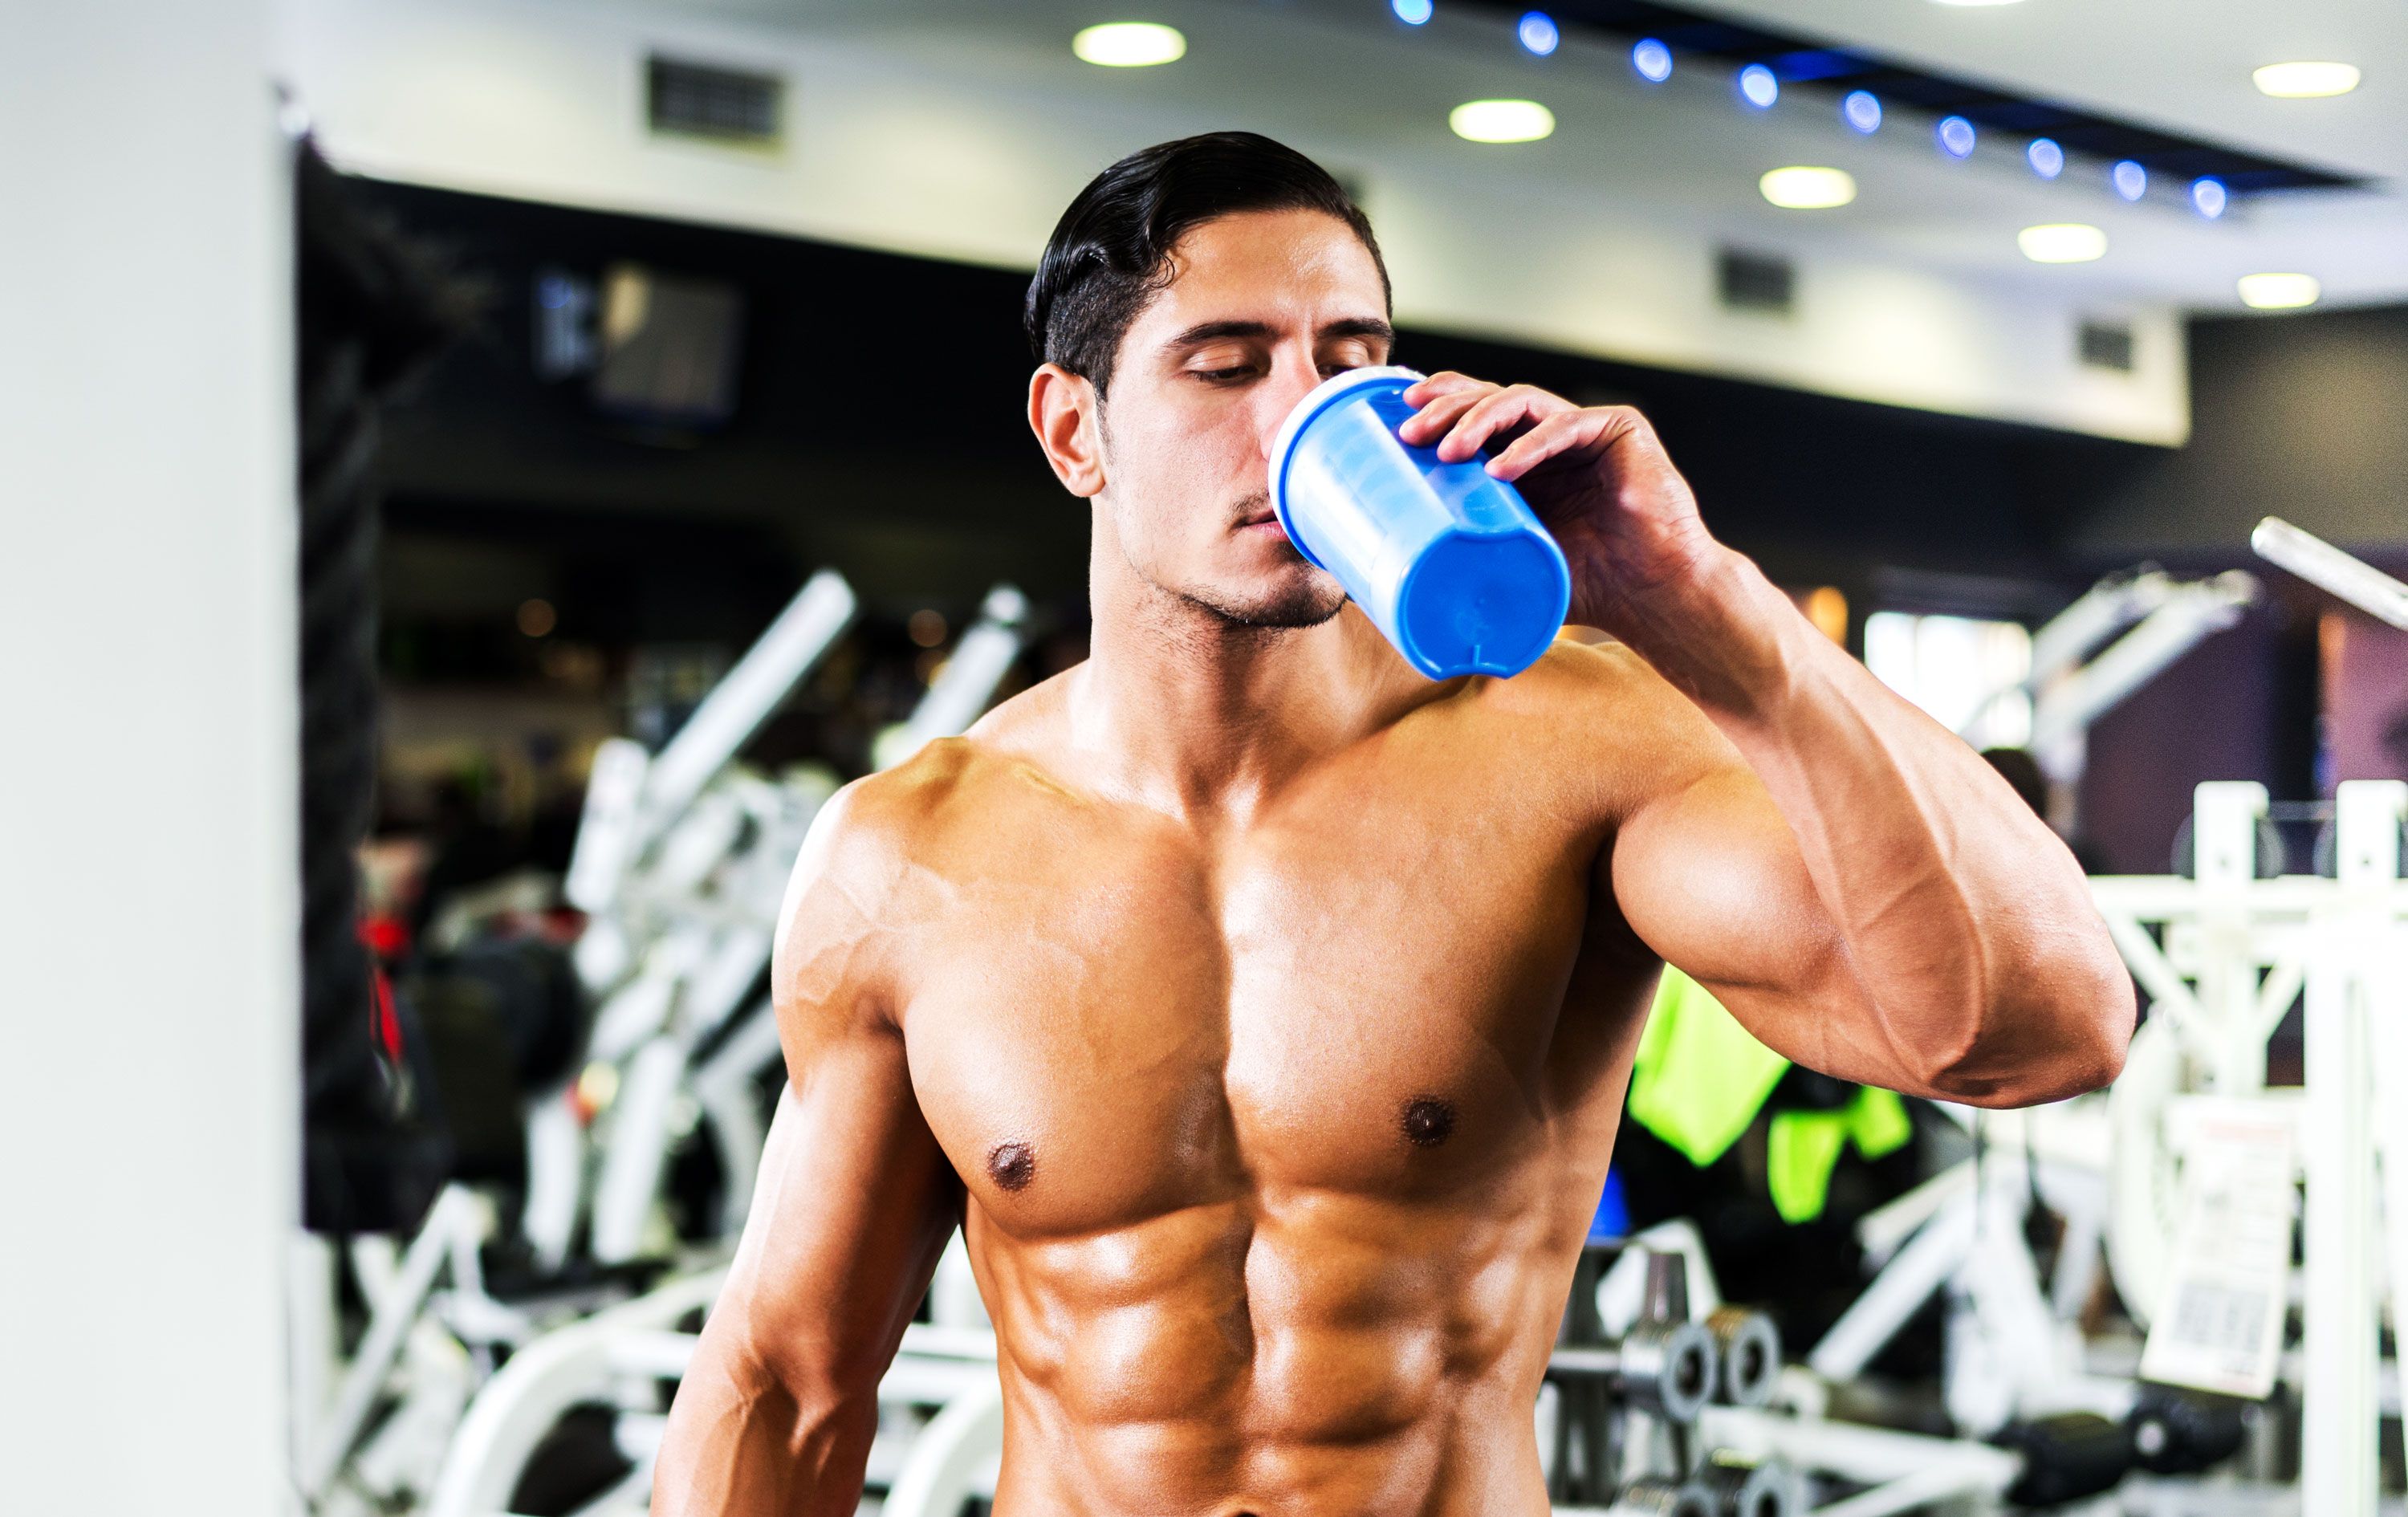 Post-Workout Nutrition Goes Beyond Just Protein